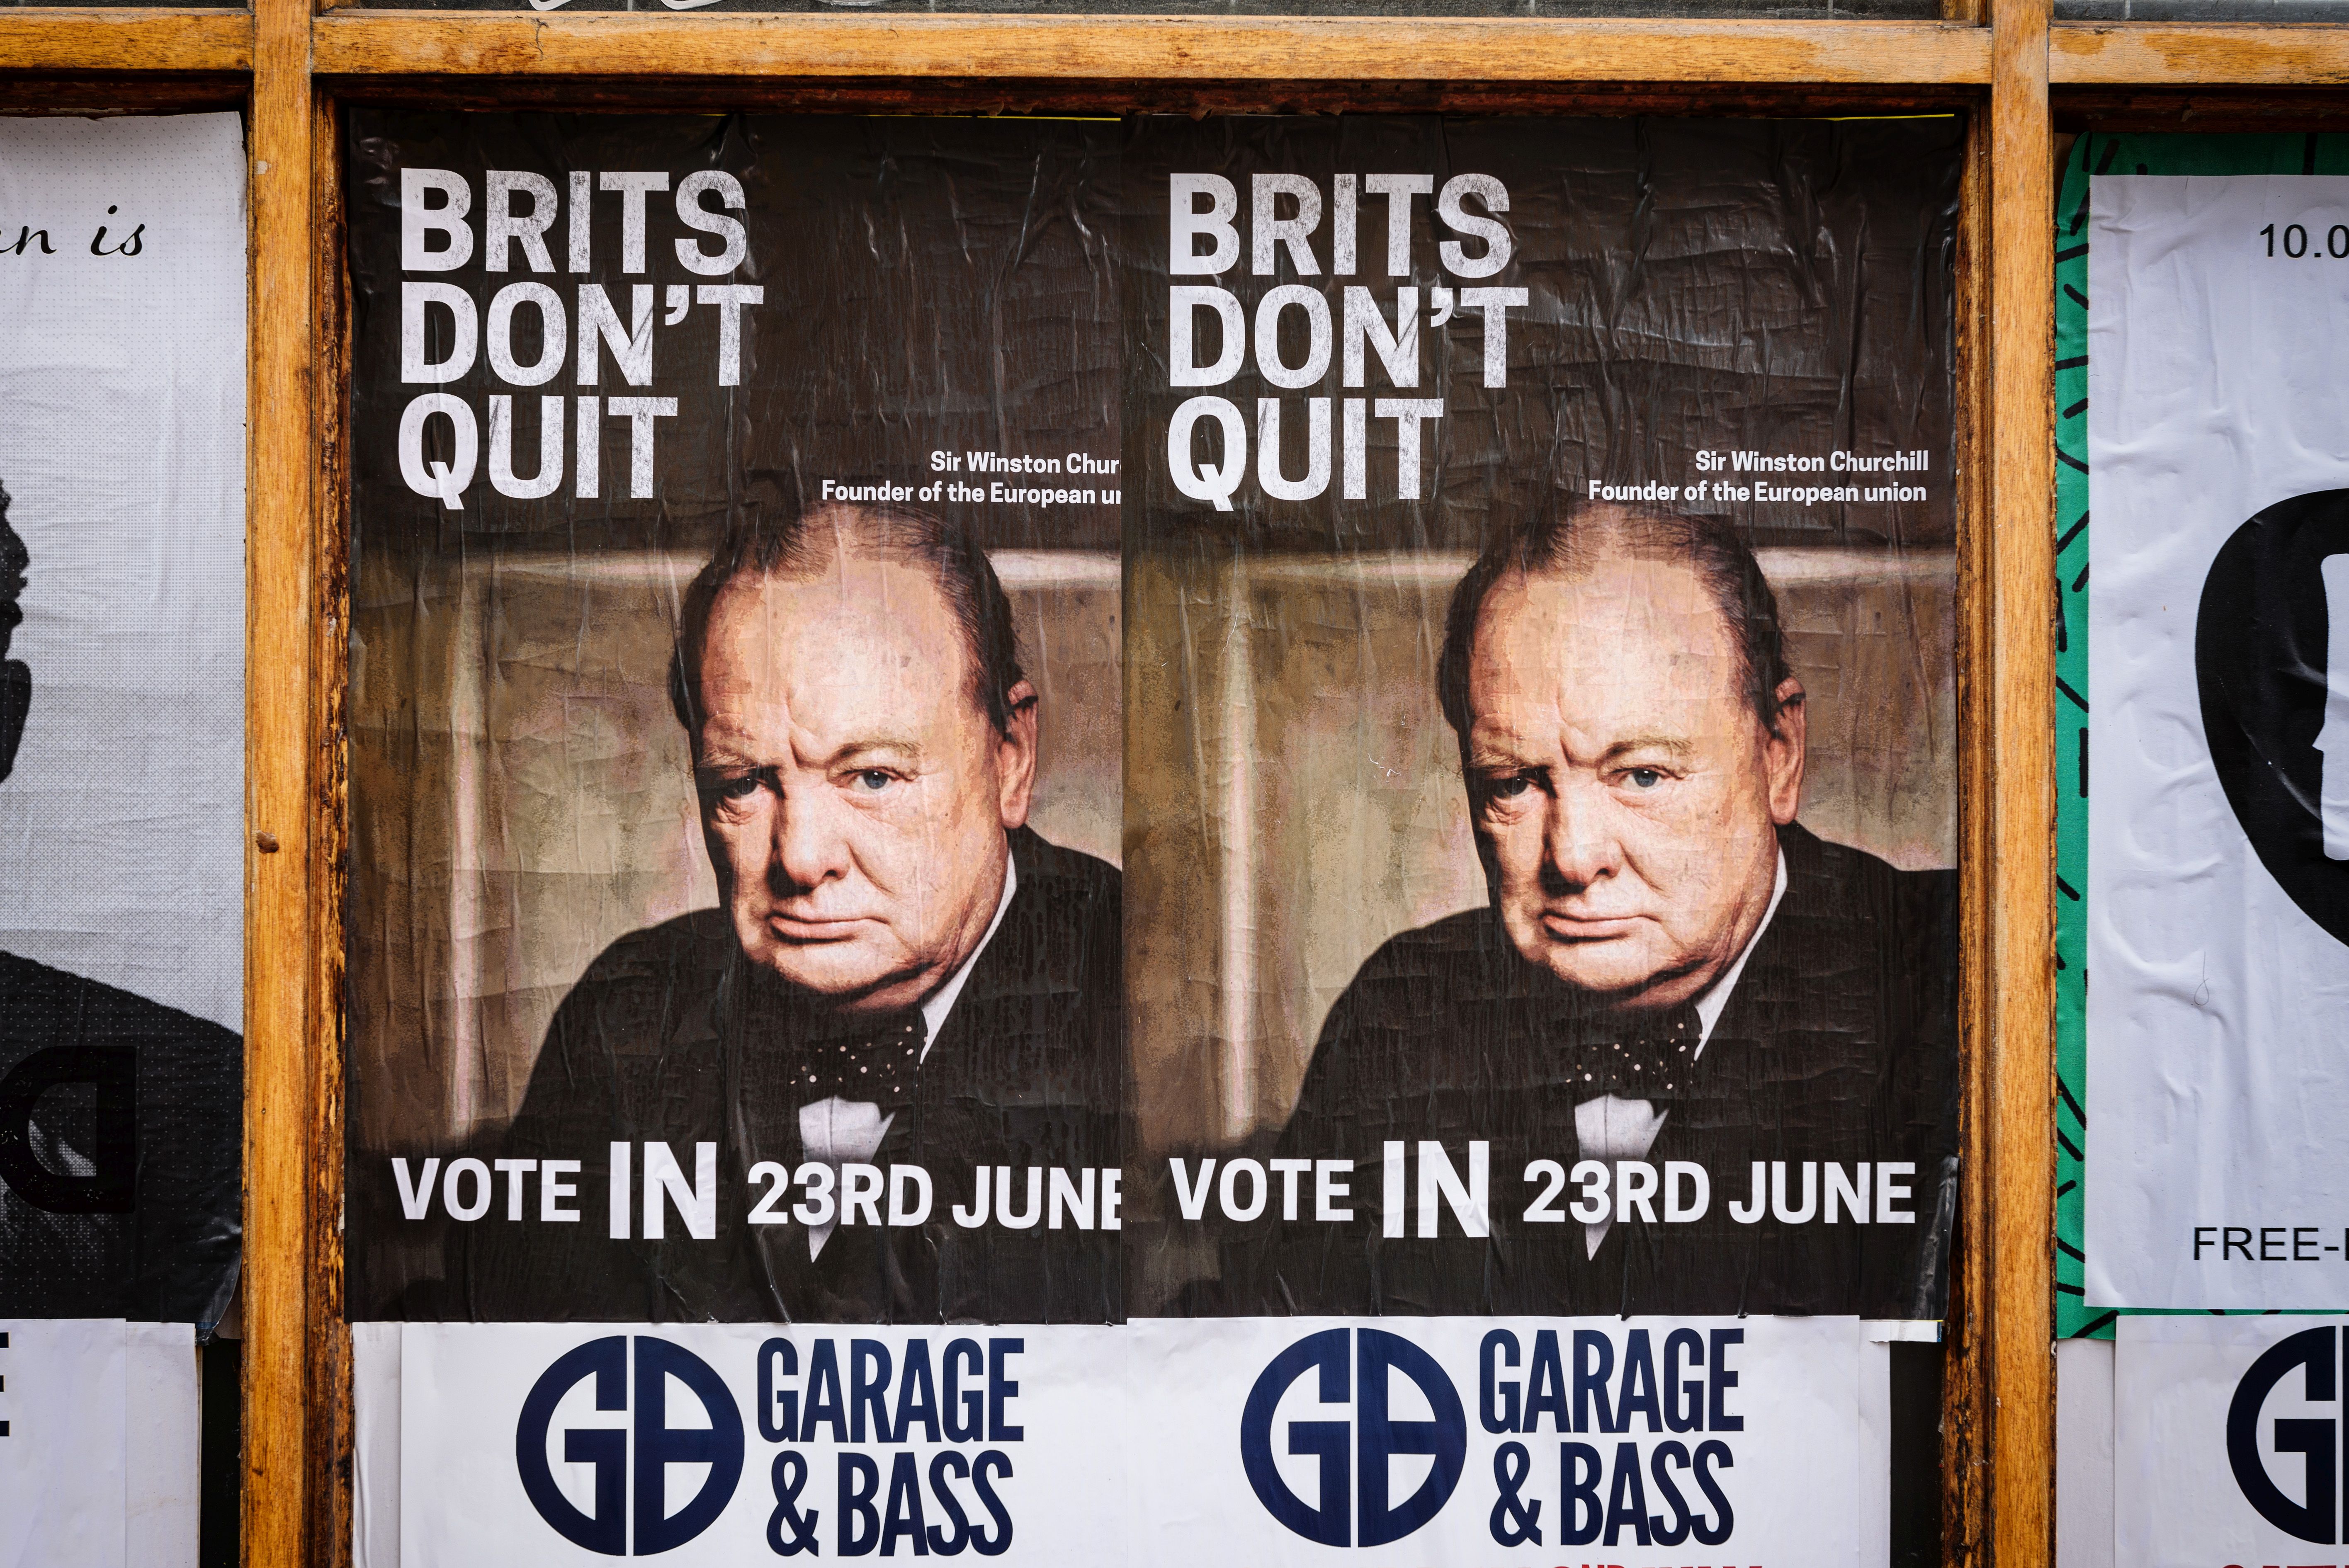 I Was Wrong – This Might Be the End of UKIP